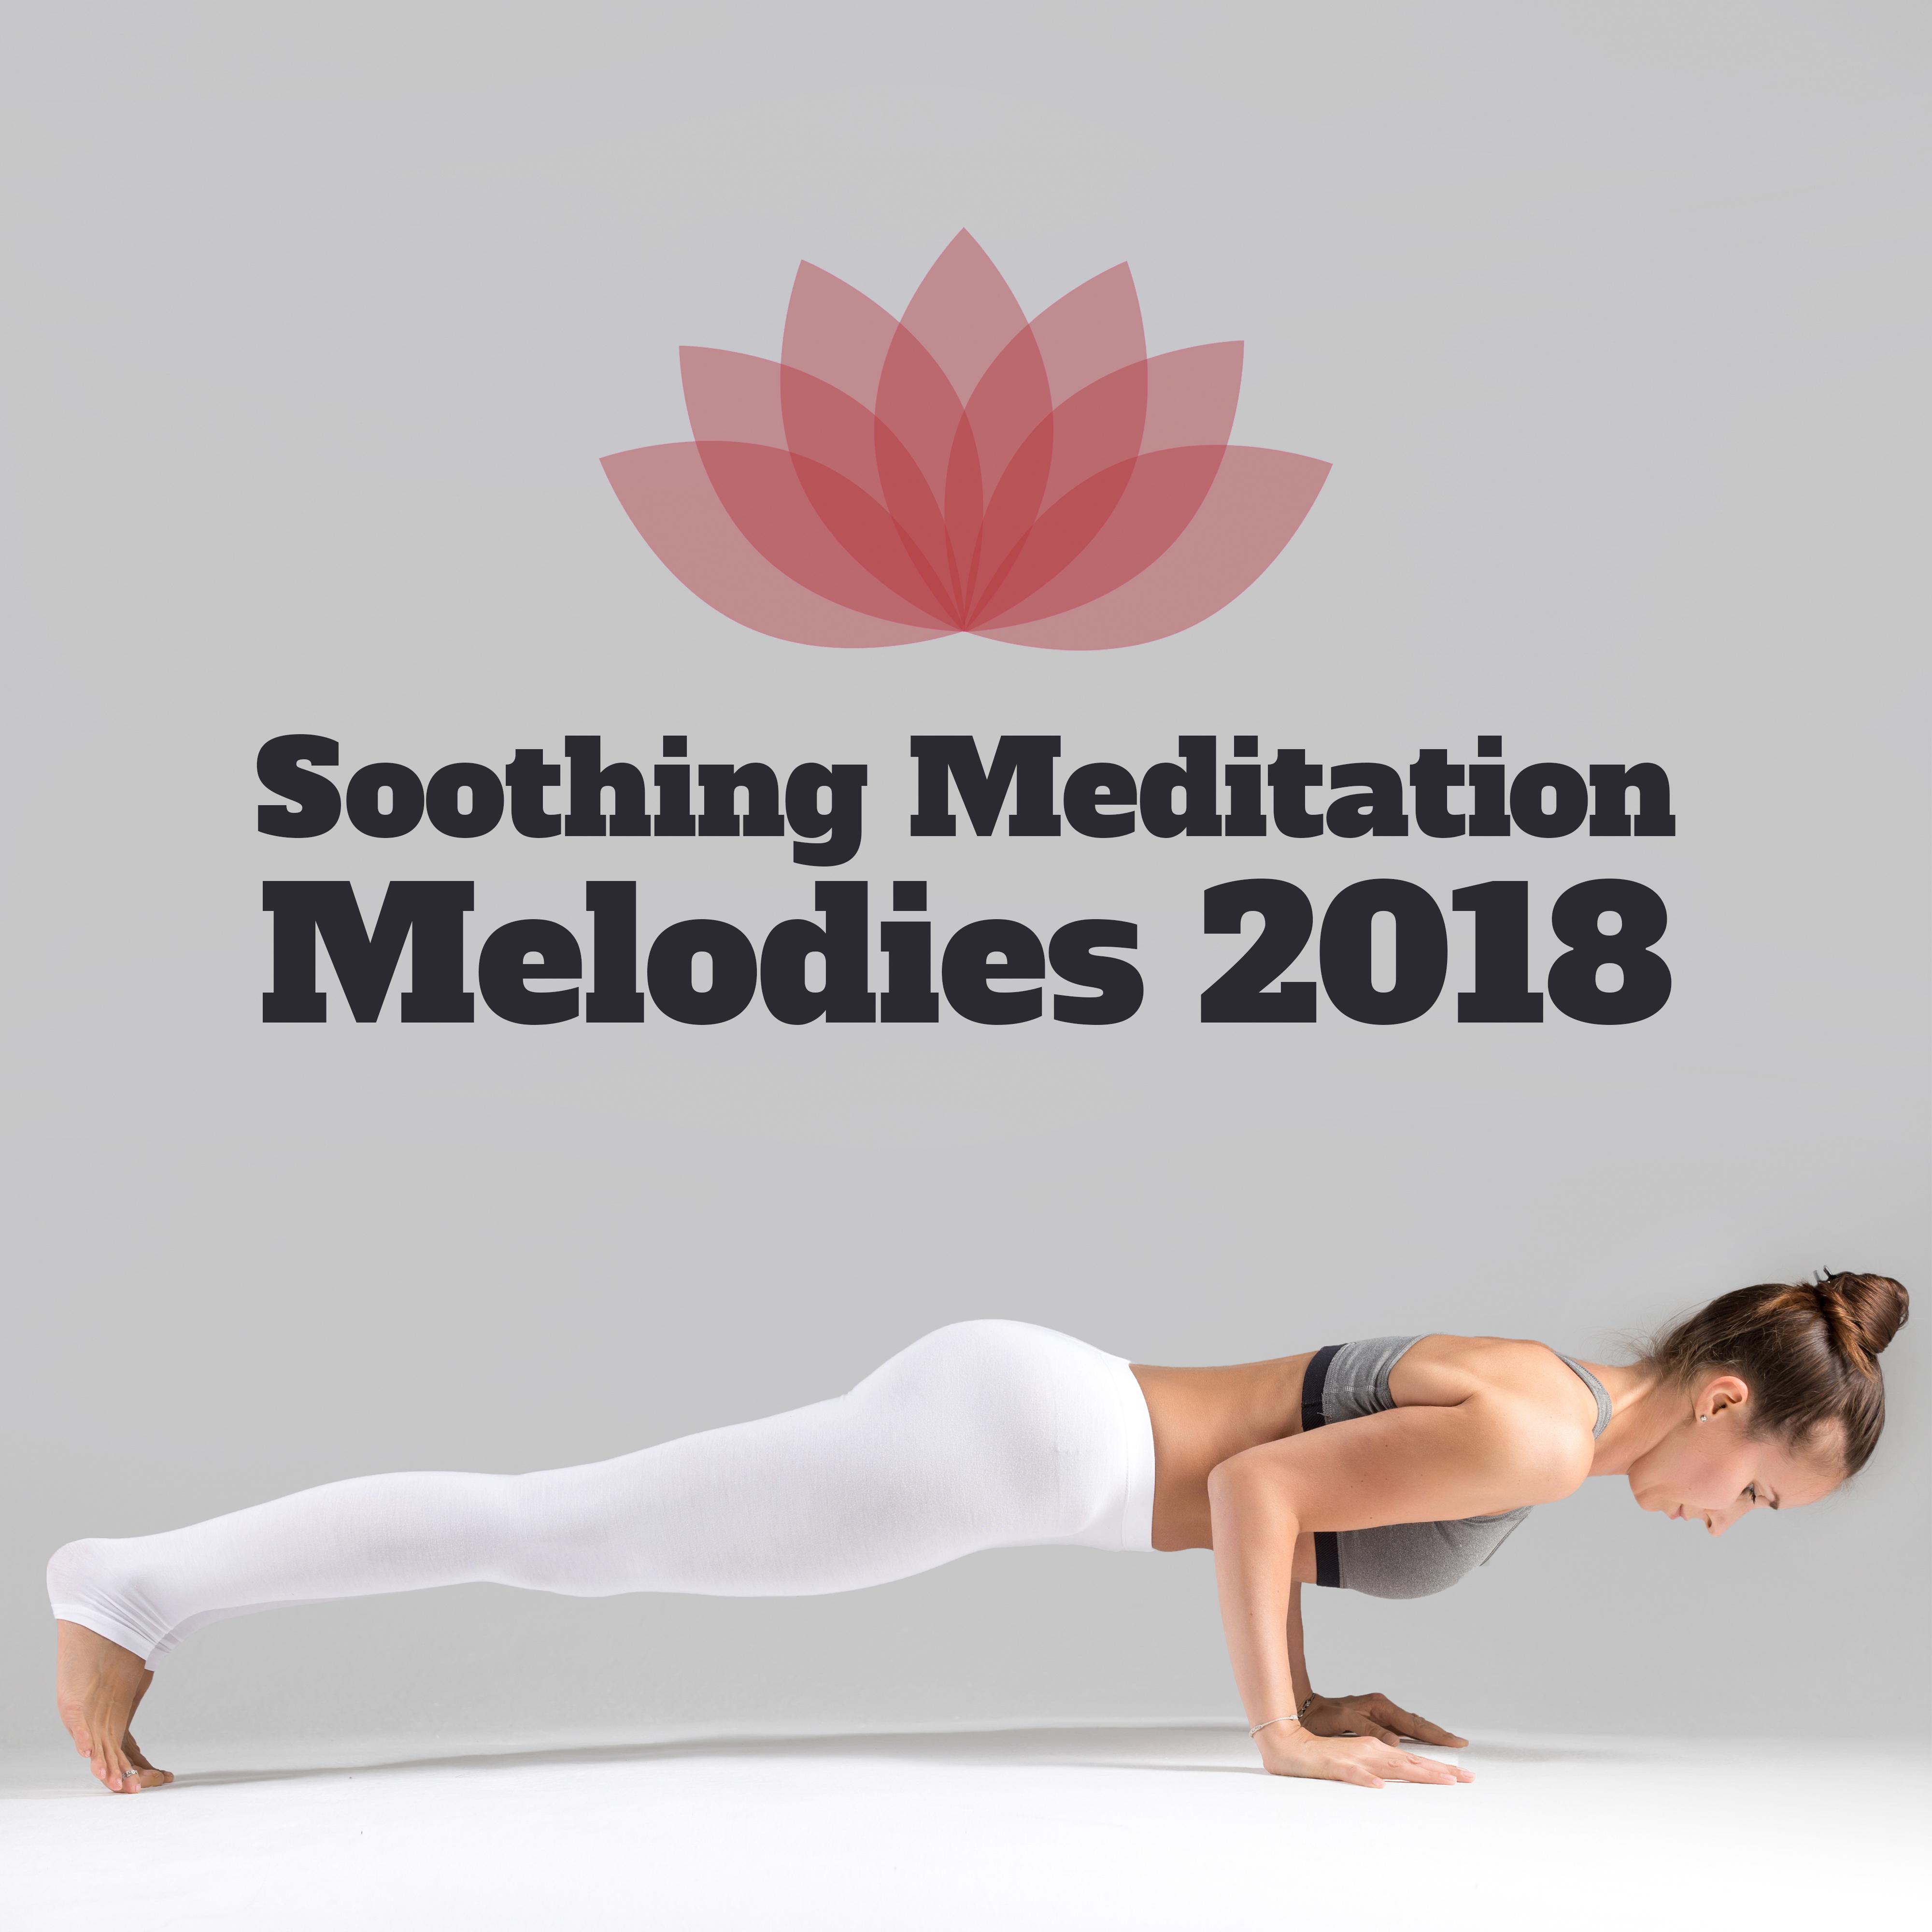 Soothing Meditation Melodies 2018